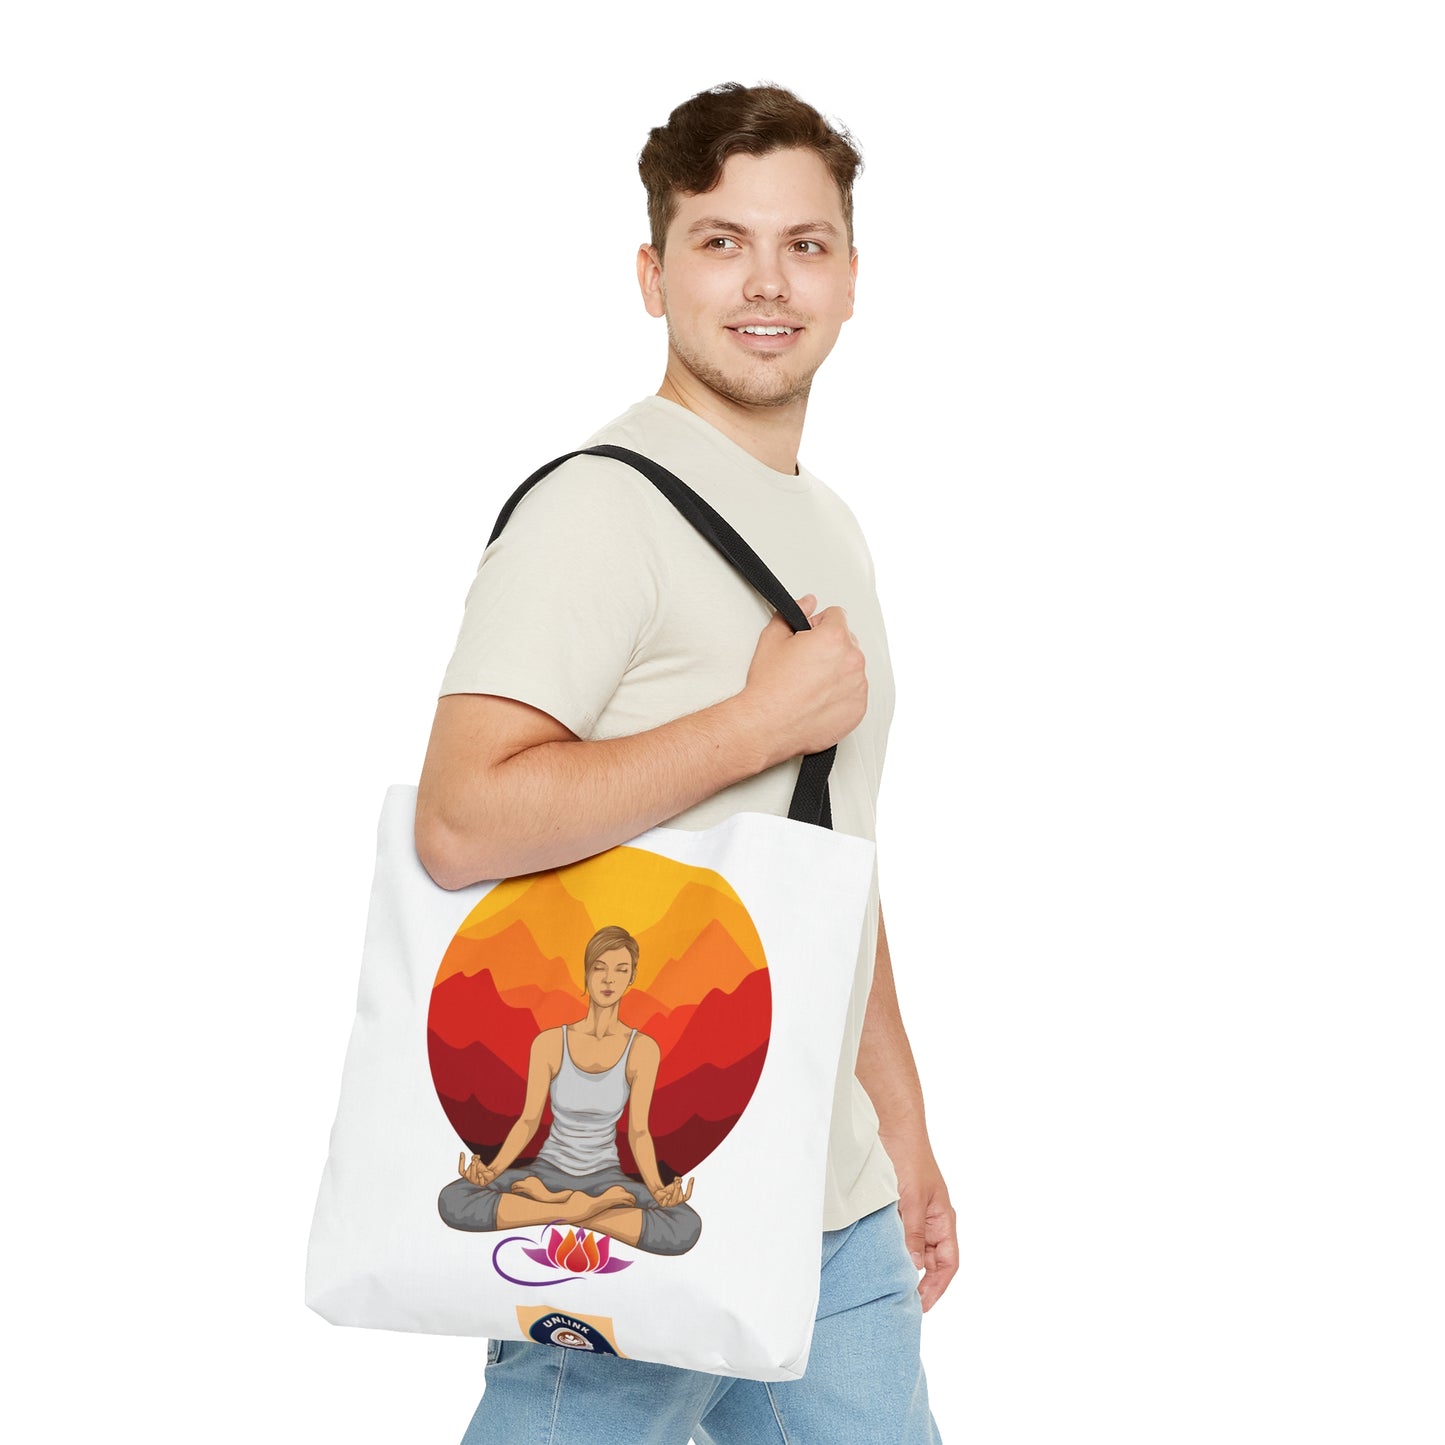 Peaceful yoga and meditation inspired tote bag. Come in 3 sizes to meet your needs. Reusable for all your shopping or trip needs.